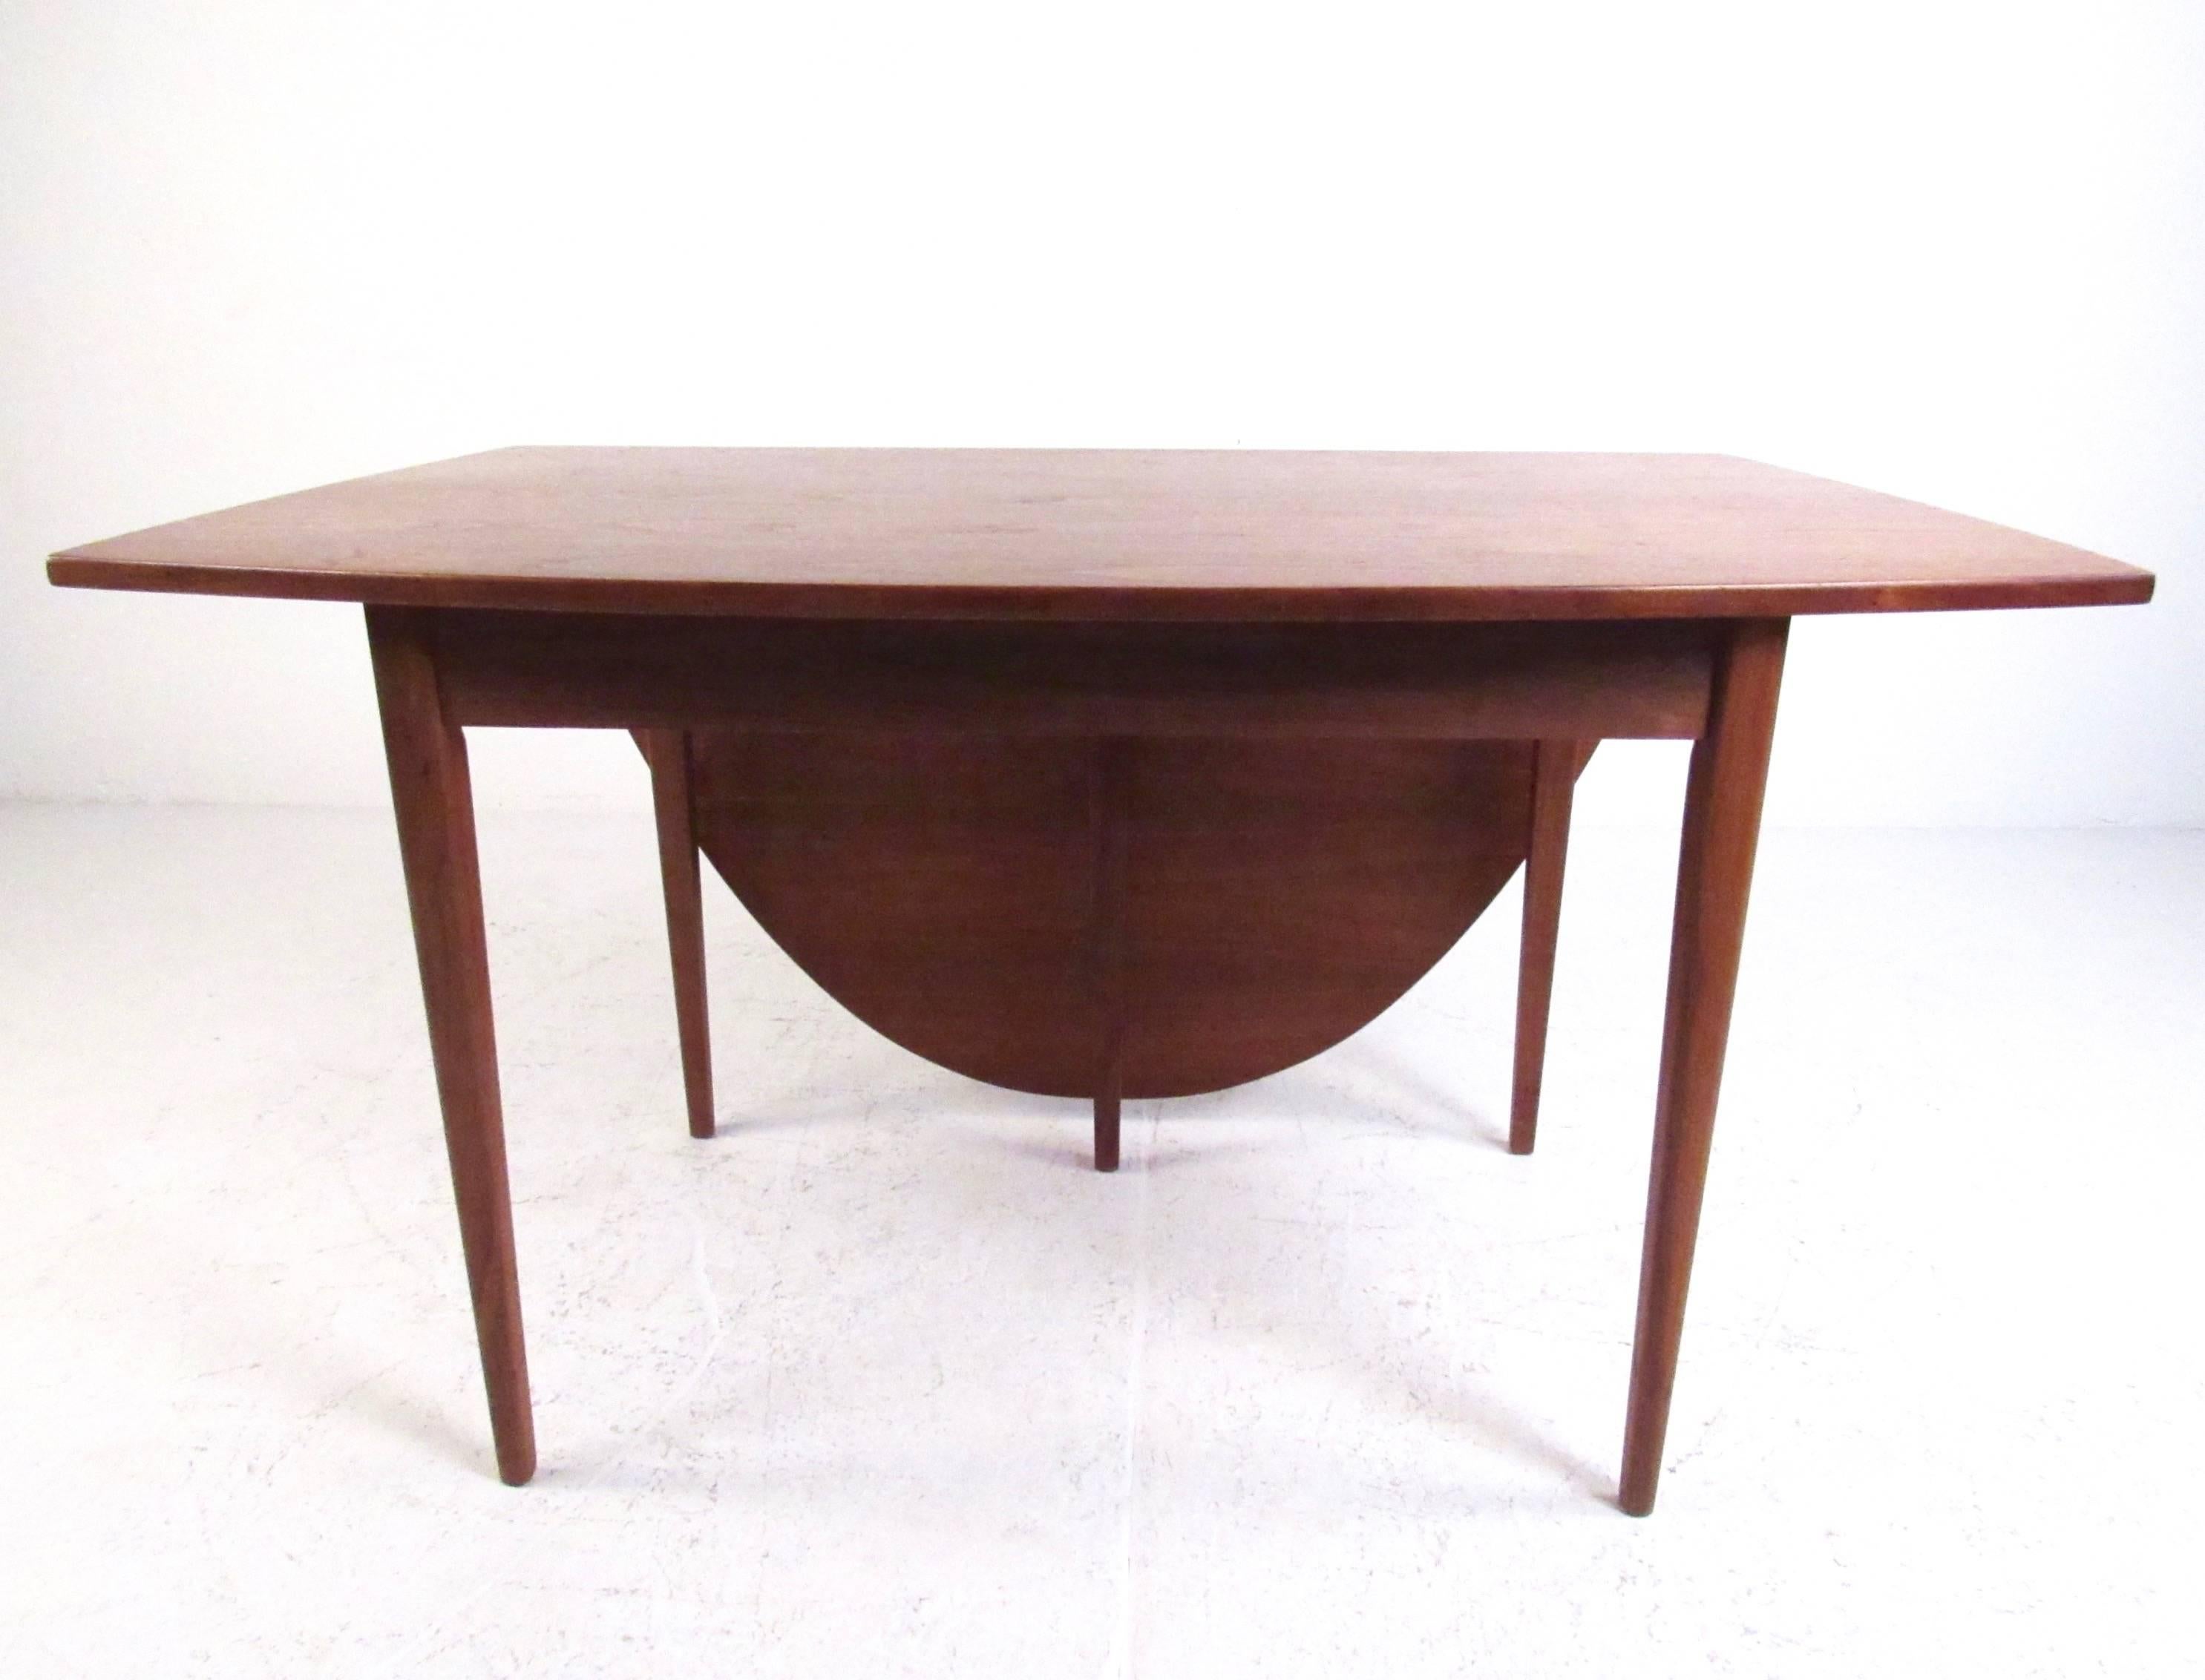 This midcentury drop-leaf table features Scandinavian teak construction and stylish Danish design. The free edge triangular shape of this vintage modern table creates a demilune effect and makes a striking addition to any room. Please confirm item